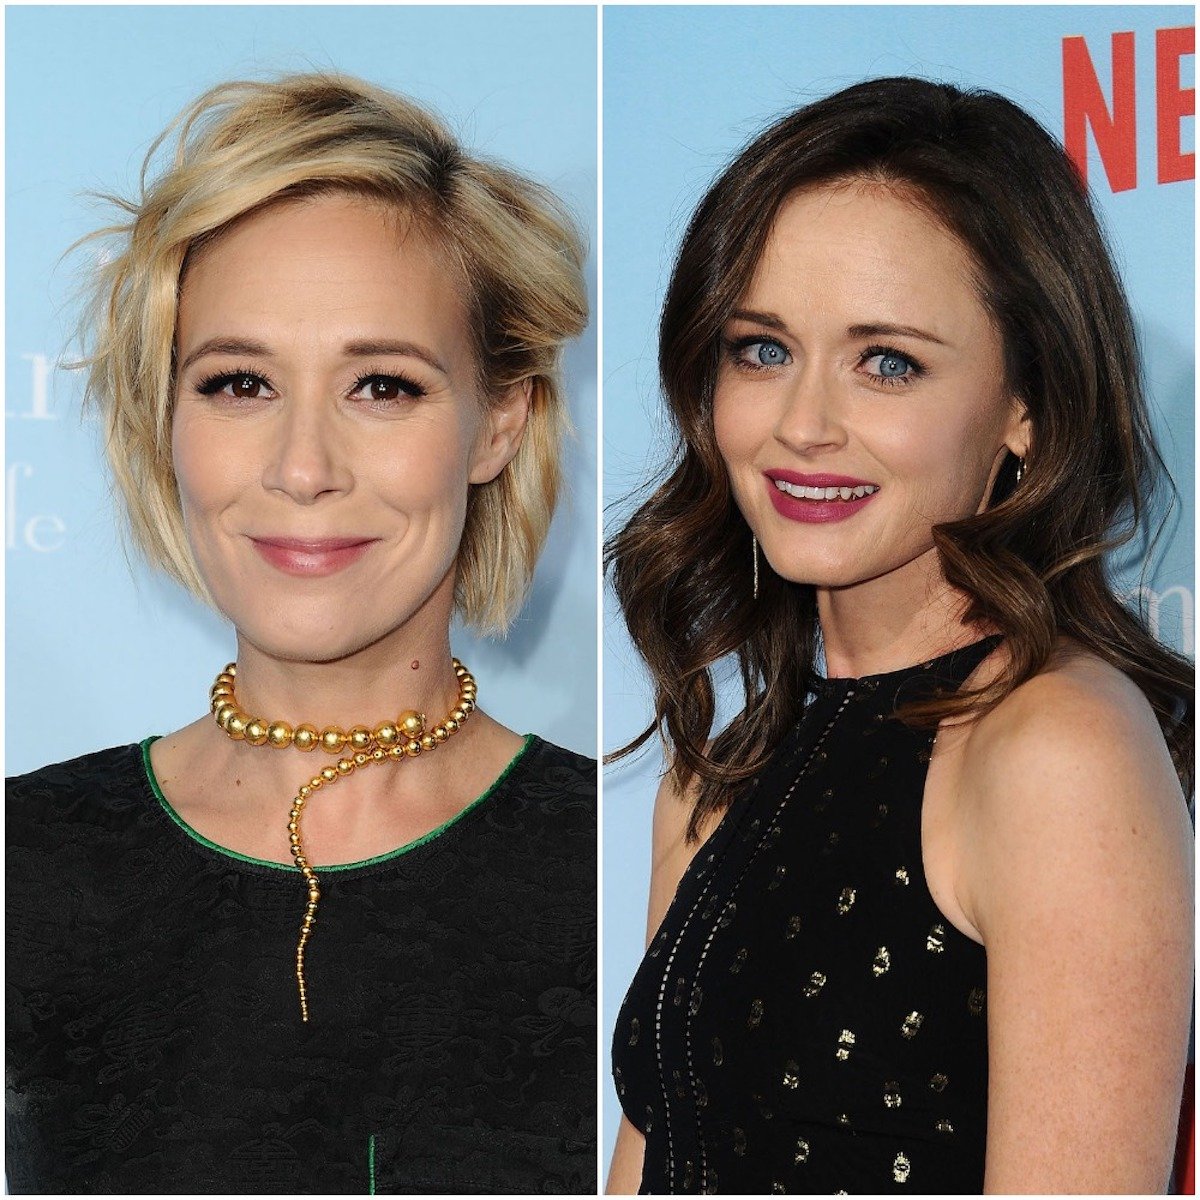 Liza Weil and Alexis Bledel, who did the 'Gilmore Girls' fencing scene, pose for photographers at the premiere of Netflix's 'Gilmore Girls: A Year in the Life'